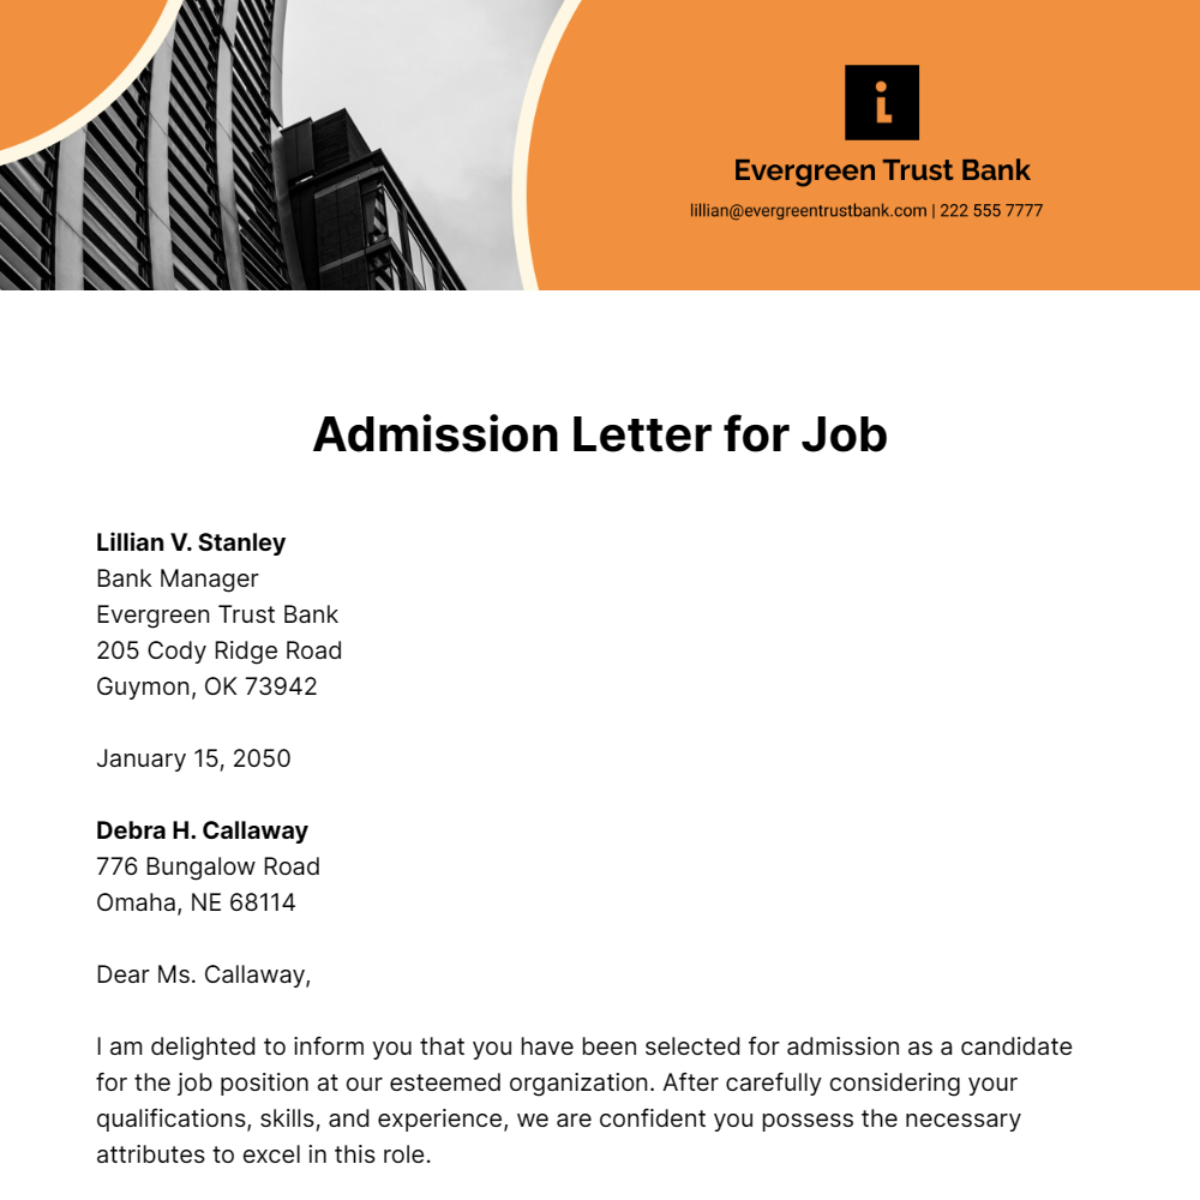 Admission Letter for Job Template